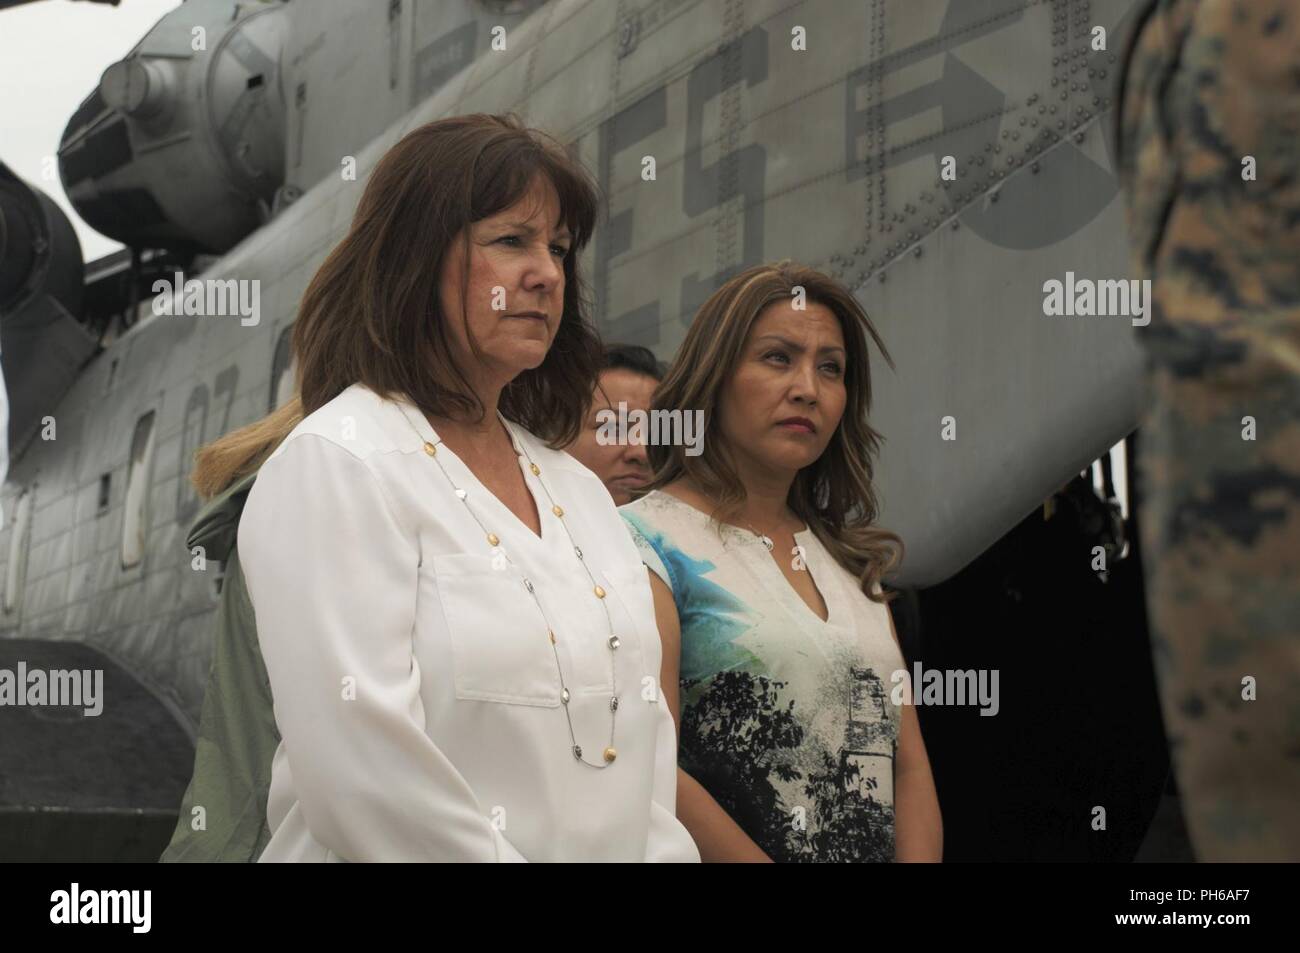 U.S. second lady Karen Pence, left, and Guatemalan first lady Patricia Morales attend a pre-flight brief before boarding a CH-53E Super Stallion helicopter belonging to Special Purpose Marine Air-Ground Task Force - Southern Command at La Aurora International Airport in Guatemala City, Guatemala, June 28, 2018. Pence flew with Morales to visit La Escuintla, an area damaged by volcanic eruptions by Fuego Volcano. Pence and her staff delivered care packages to families and assessed the total damage caused by the volcano that has affected the lives of millions in the area. The Marines and sailors Stock Photo